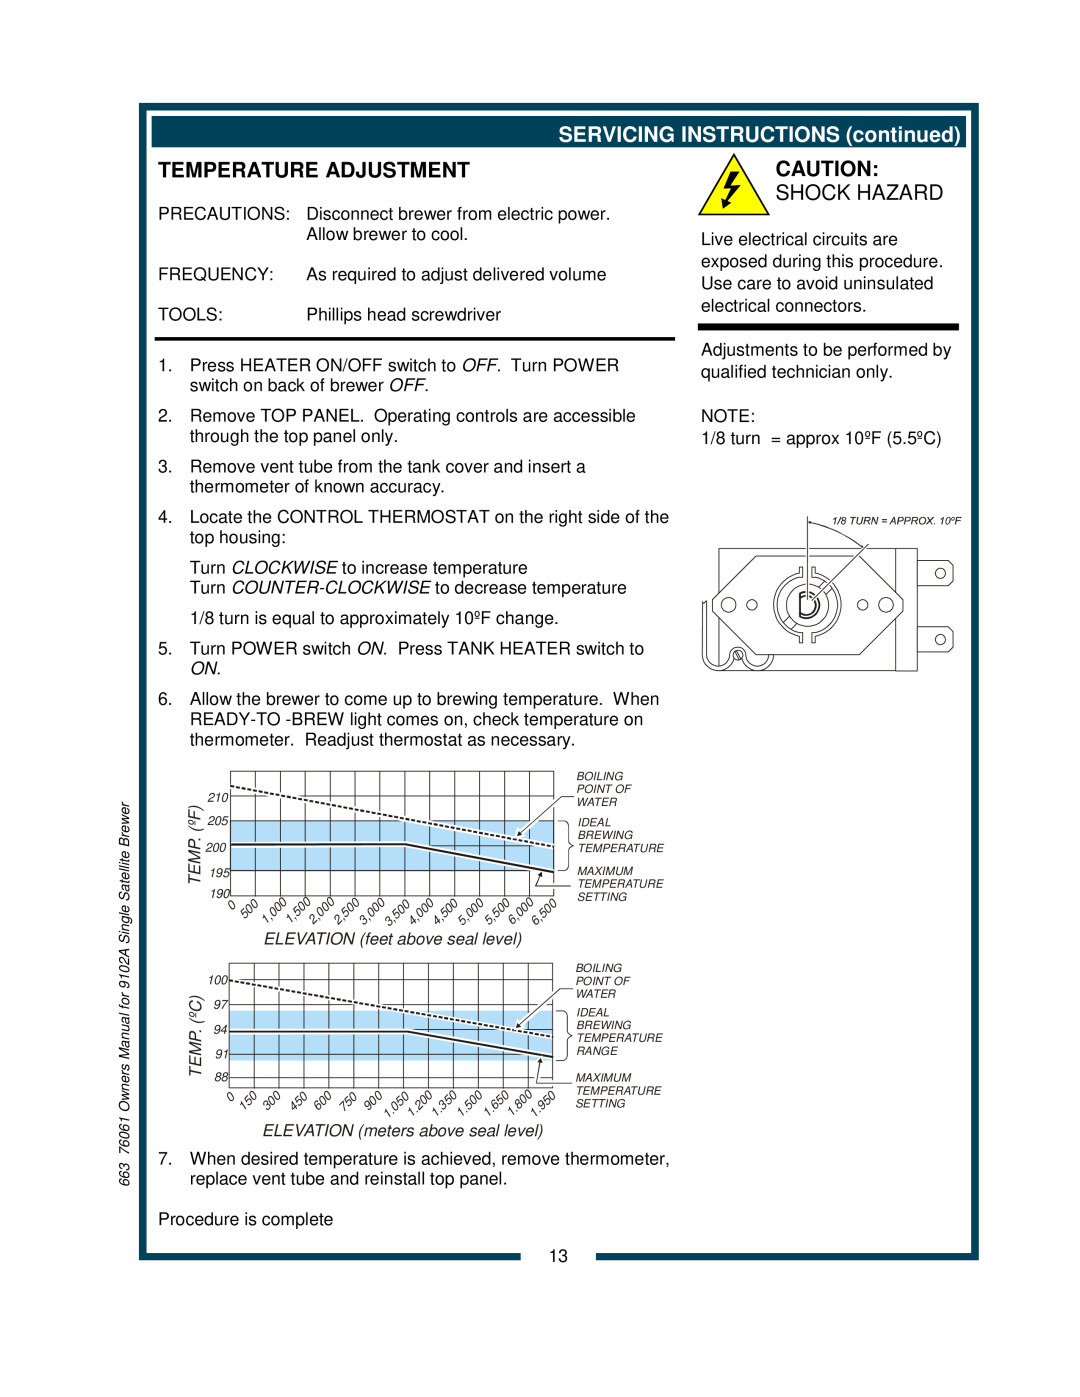 Bloomfield 9104A, 9102A owner manual SERVICING INSTRUCTIONS continued, Temperature Adjustment 